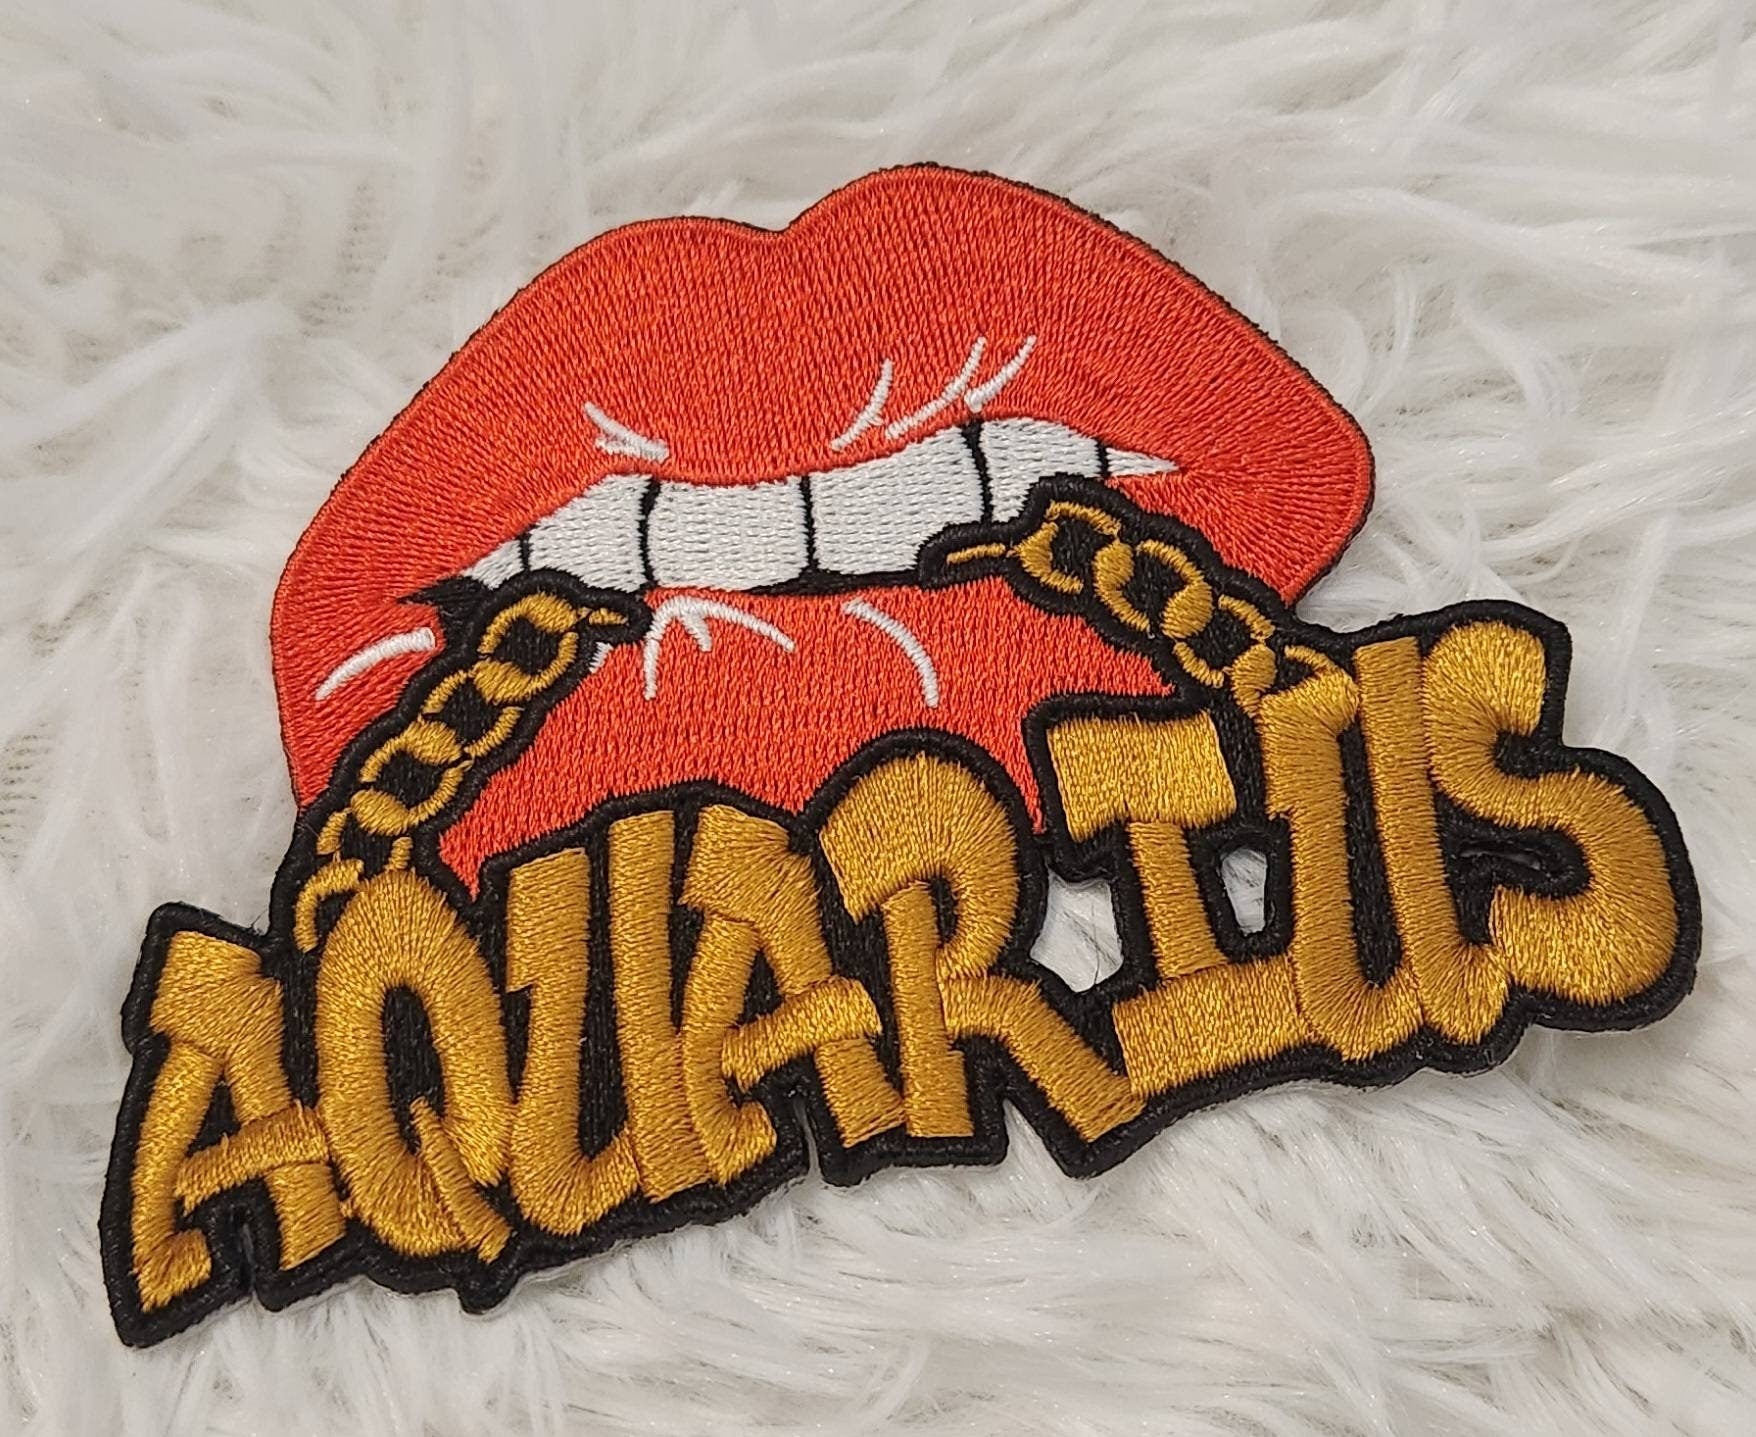 New Color, Poppin' Red Lip "Aquarius" w/DARK Gold Chain|Iron-On Patch|Astrology Applique|Cool Embroidered Patch|DIY Patch